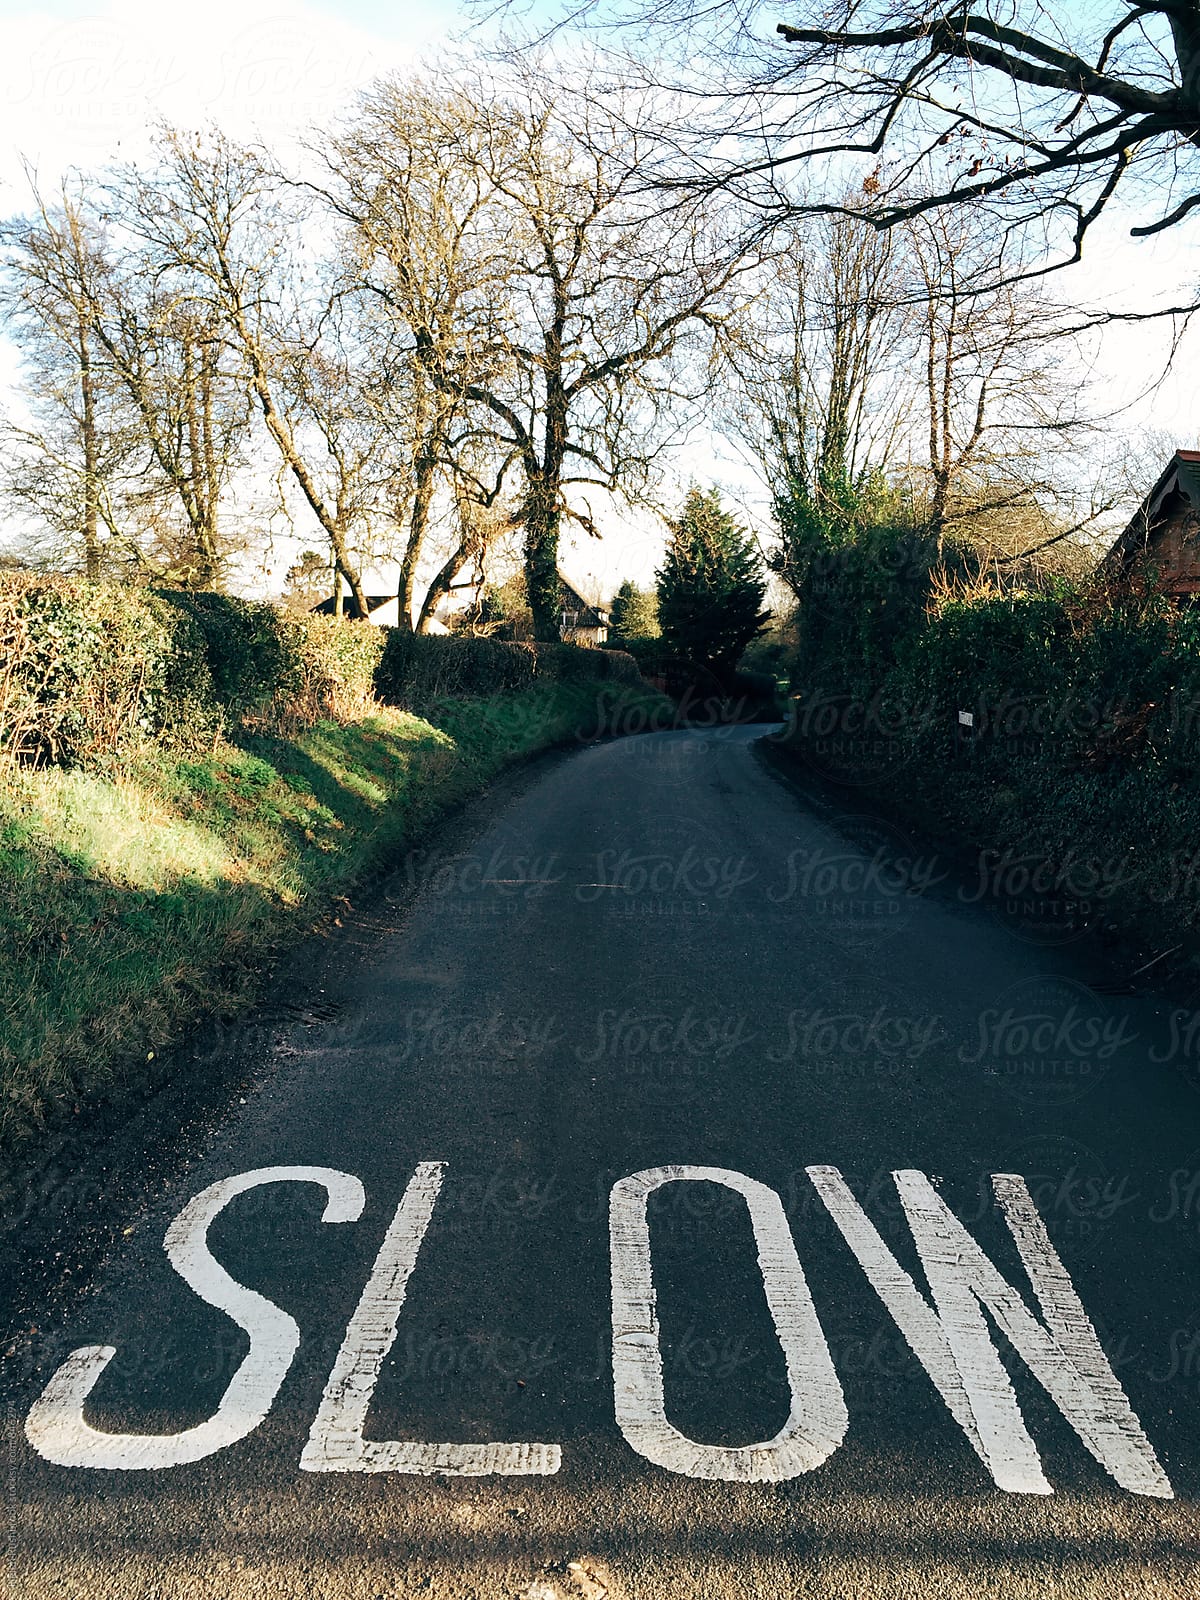 Slow painted on a country road.